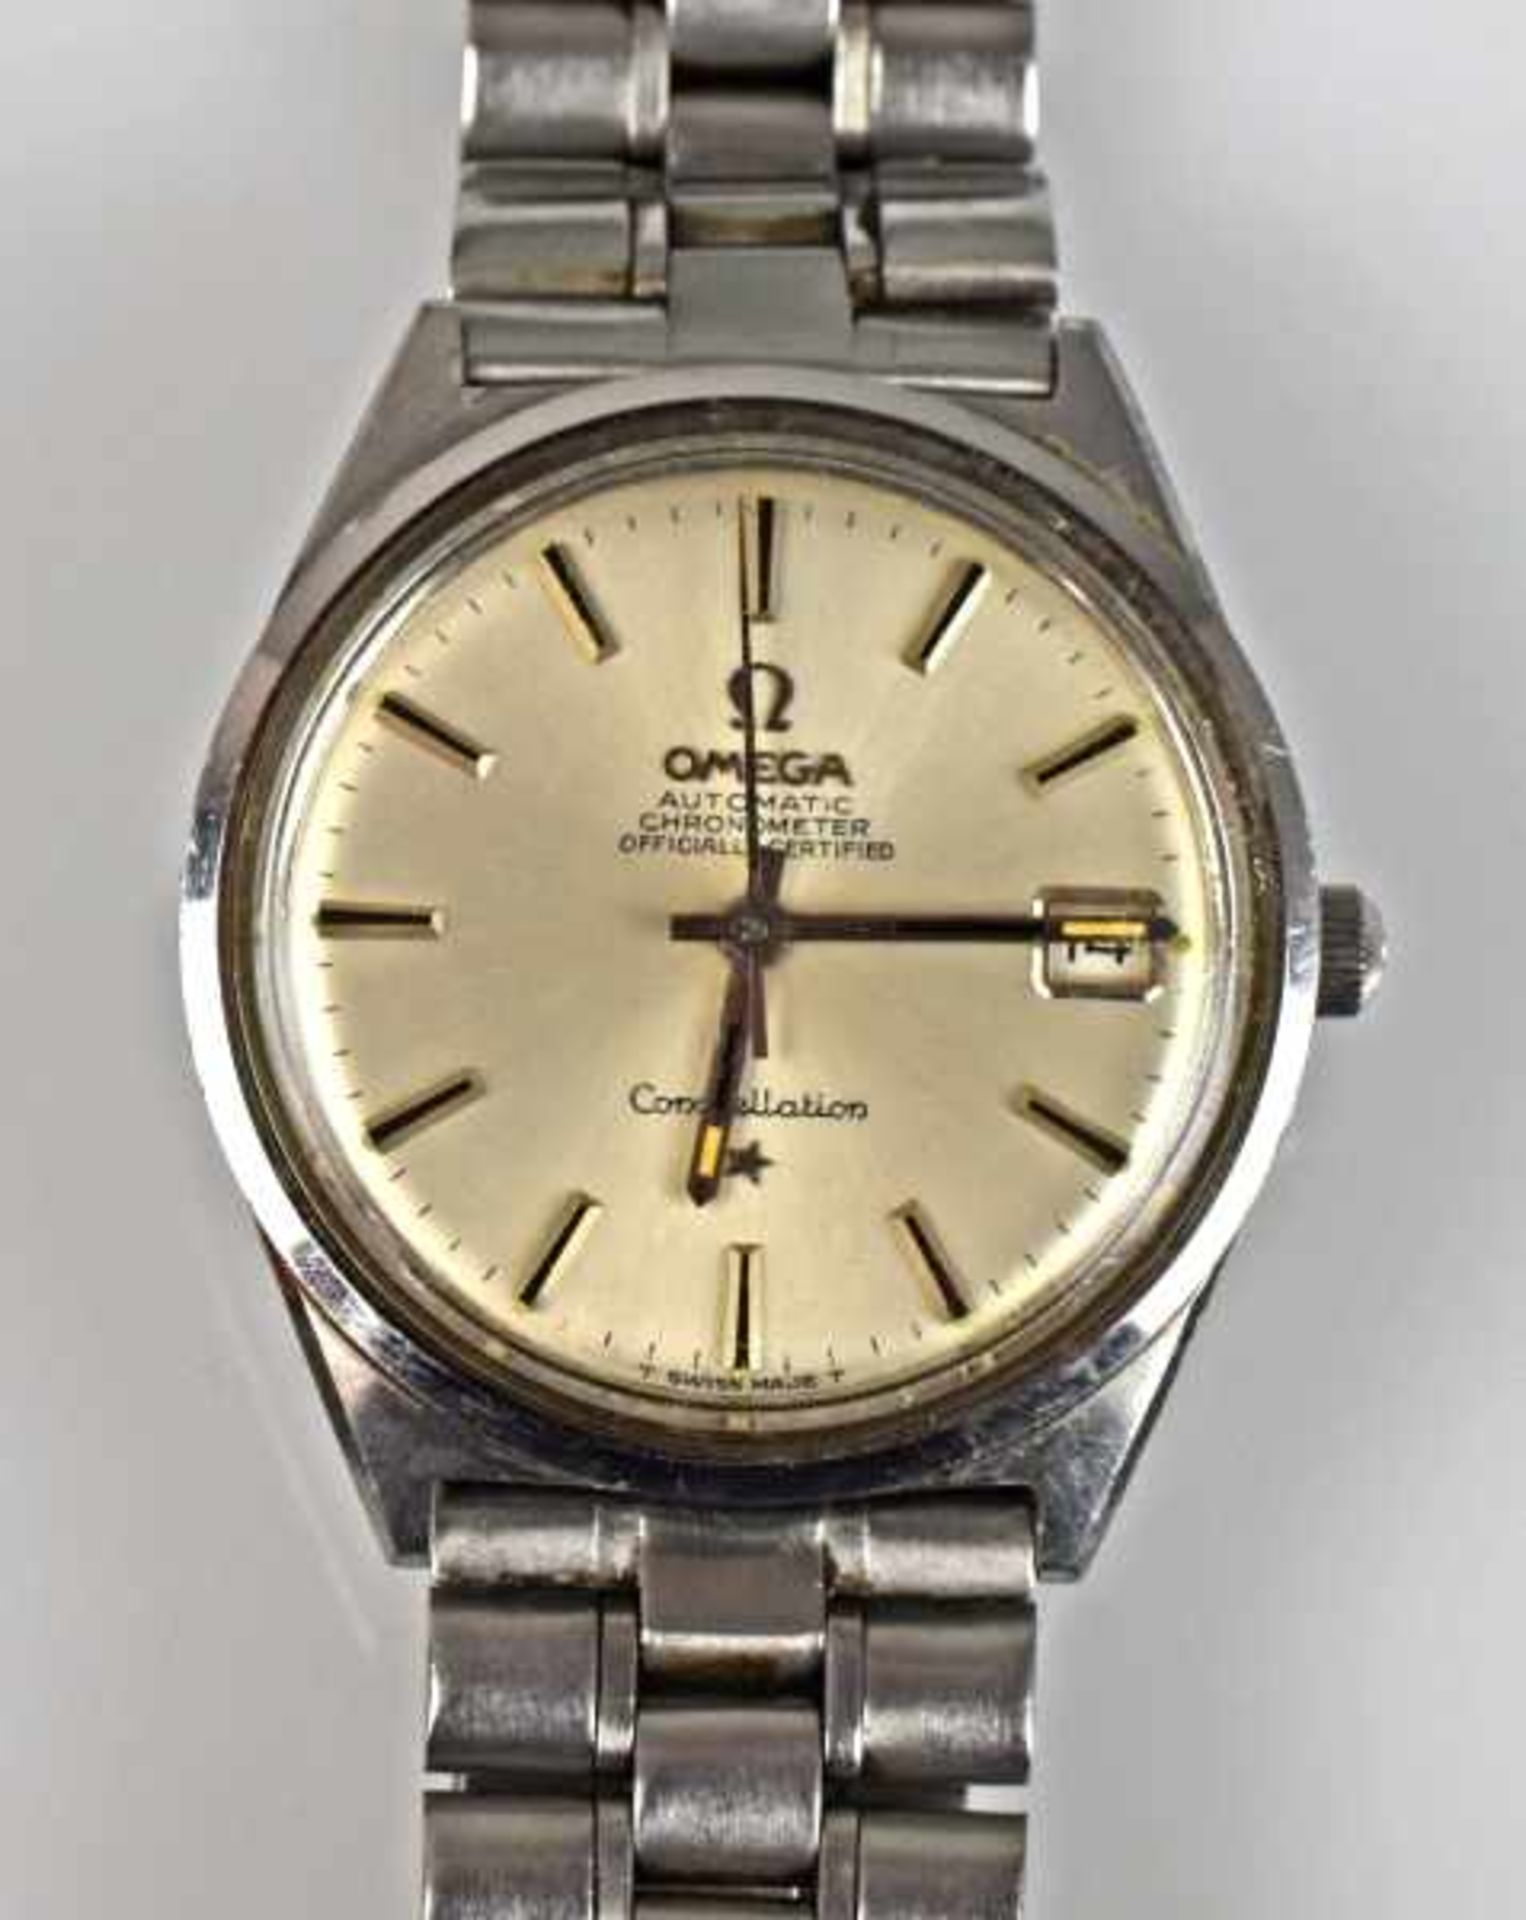 ARMBANDUHR OMEGA Constellation, Automatic, Chronometer, officially certified, rundes Stahlgehäuse